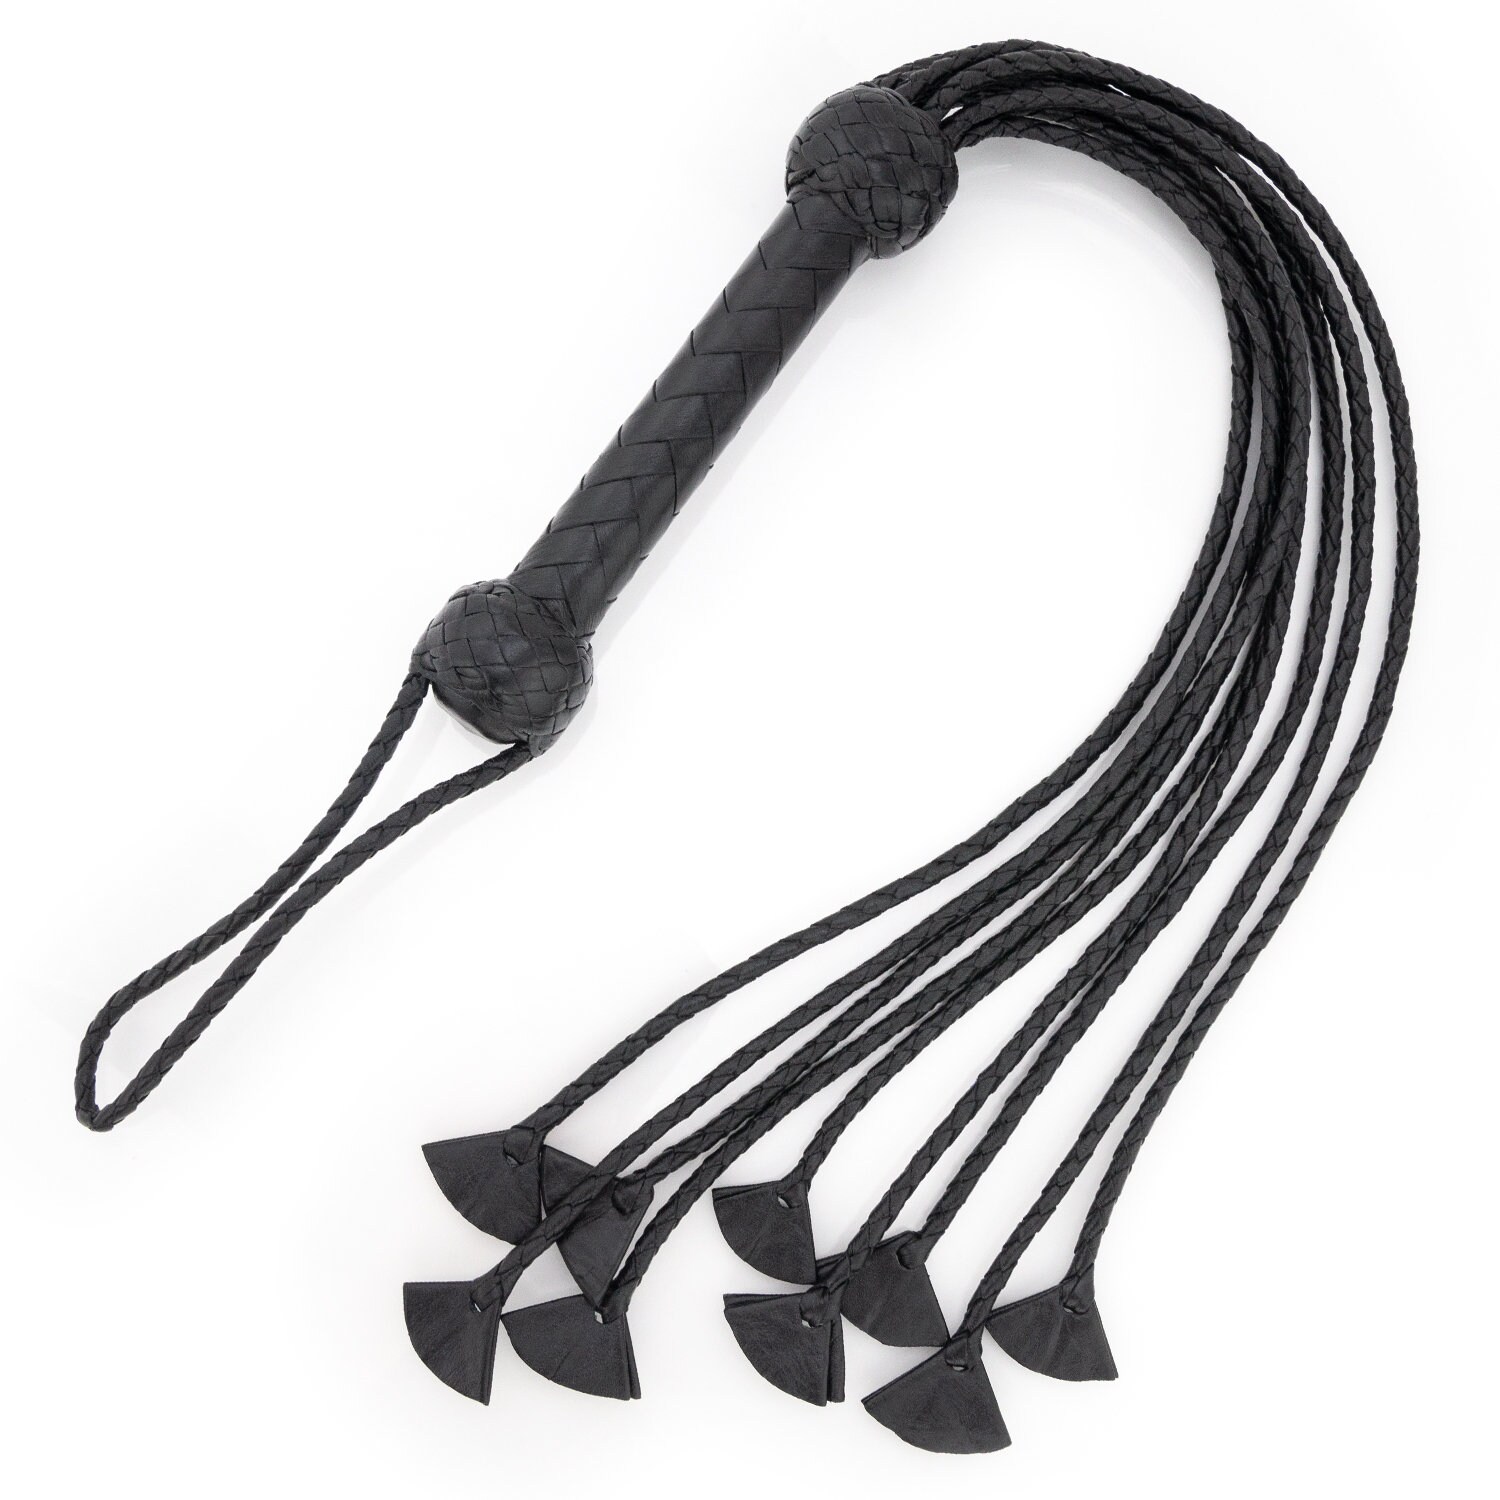 Deluxe Gothic Black CAT-O-NINE TAIL LEATHER WHIP Flail Flogger LARP Costume Prop 